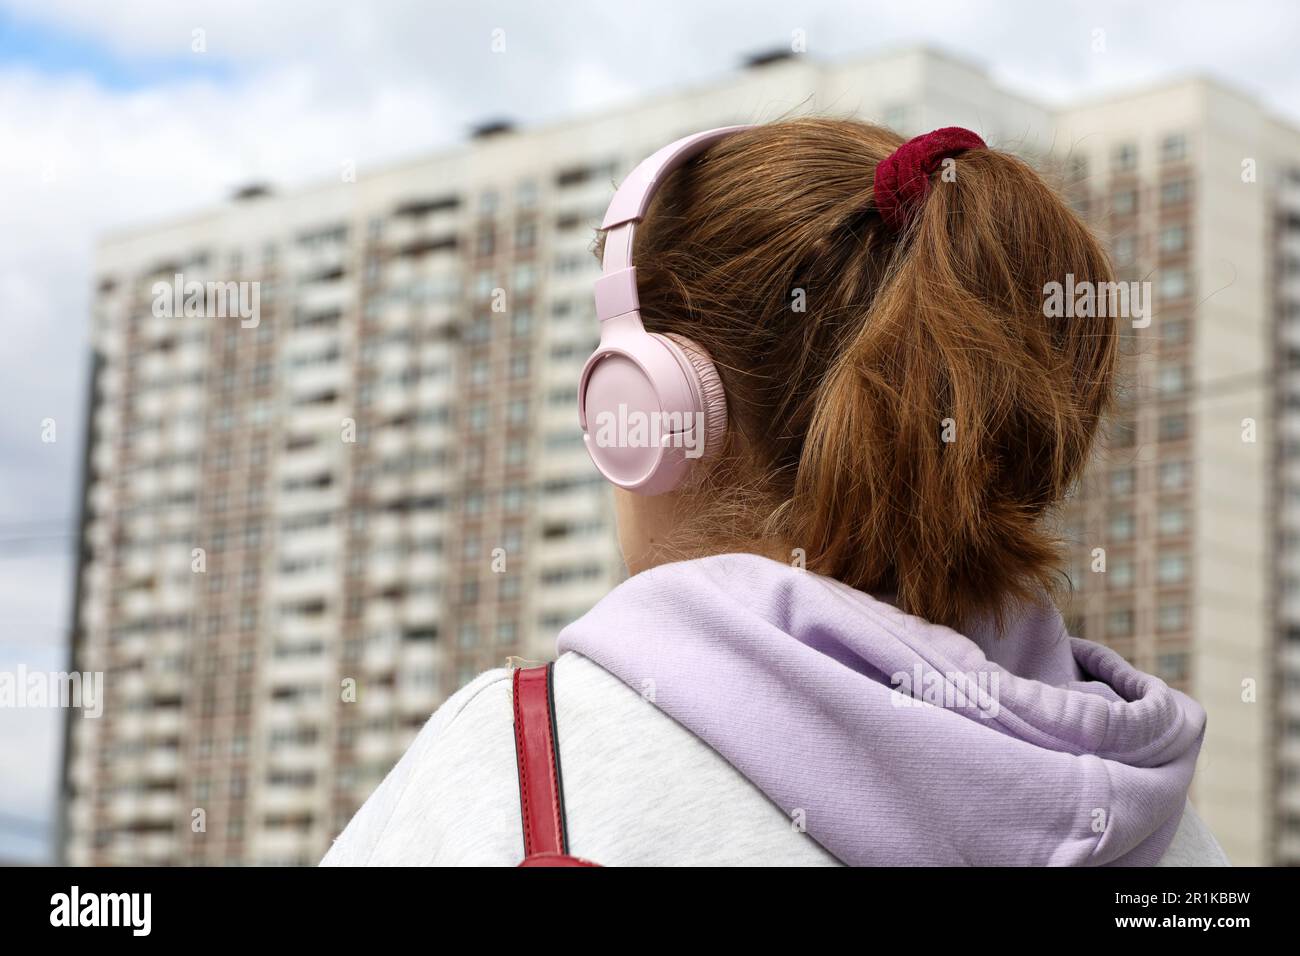 Girl with pink headphones standing on residential buildings background. Headset, listening to music and city life concept Stock Photo